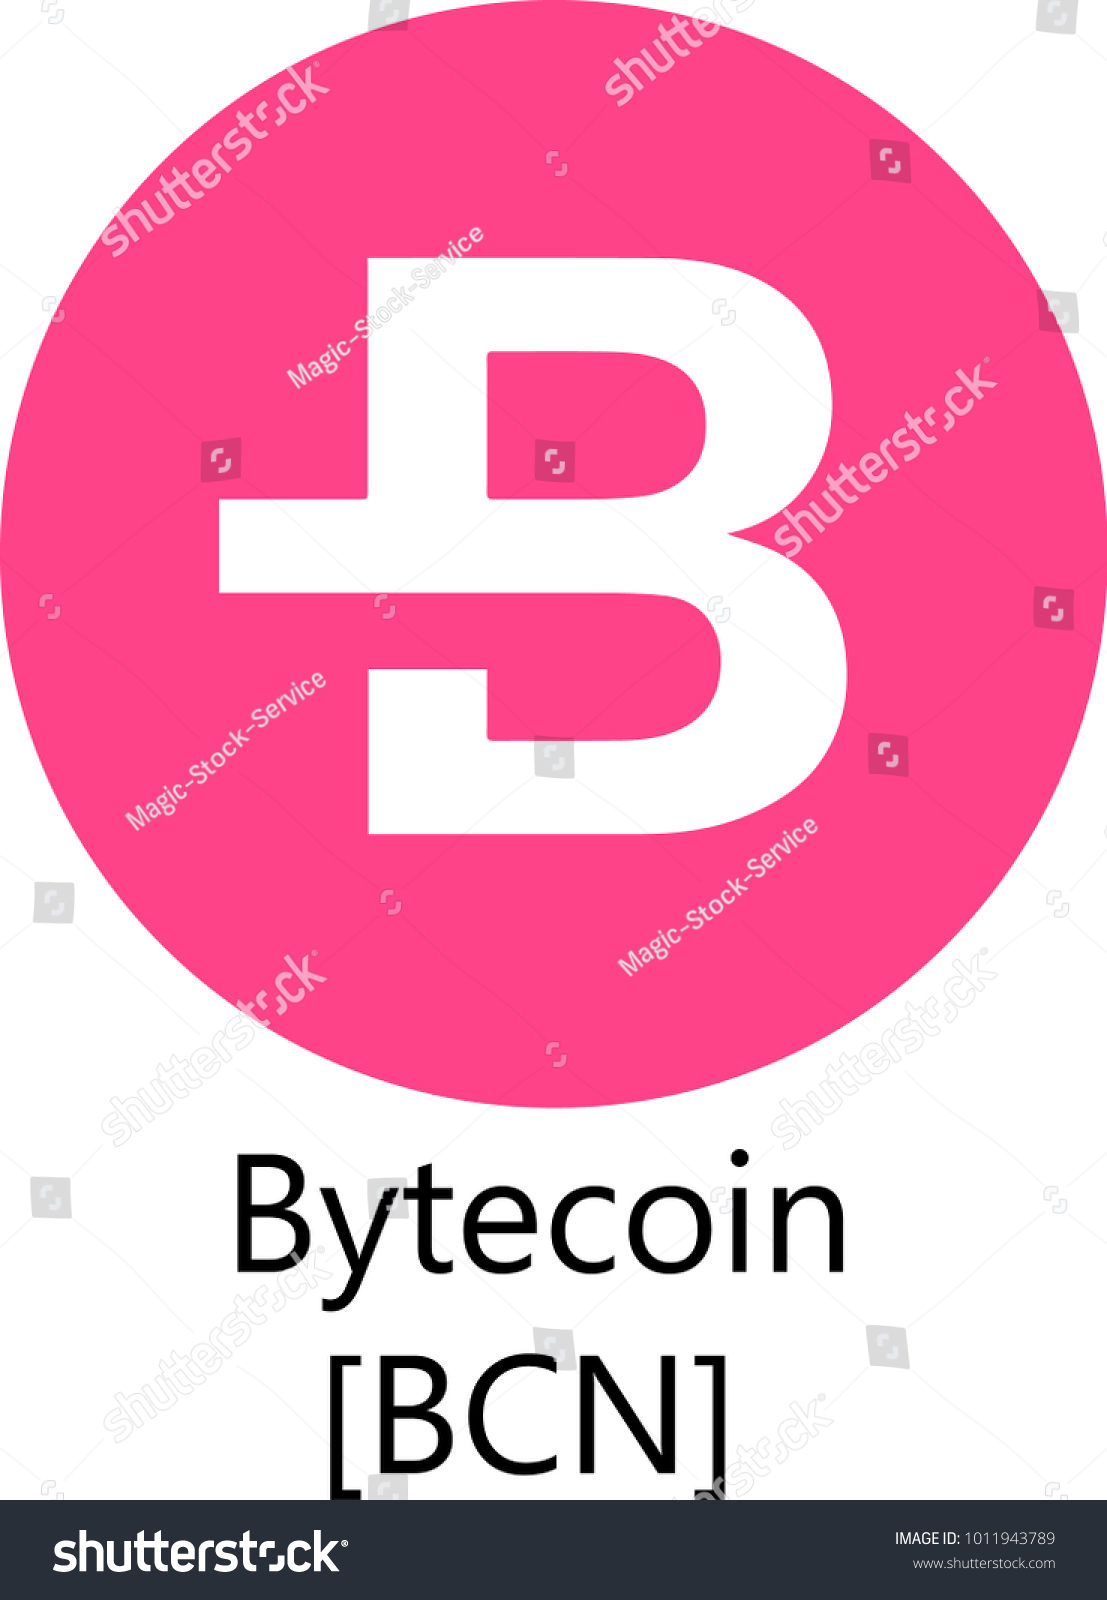 SVG of Vector Illustration Of Bytecoin BCN Cryptocurrency Coin / Virtual Money Icon / Logotype In Color
 svg